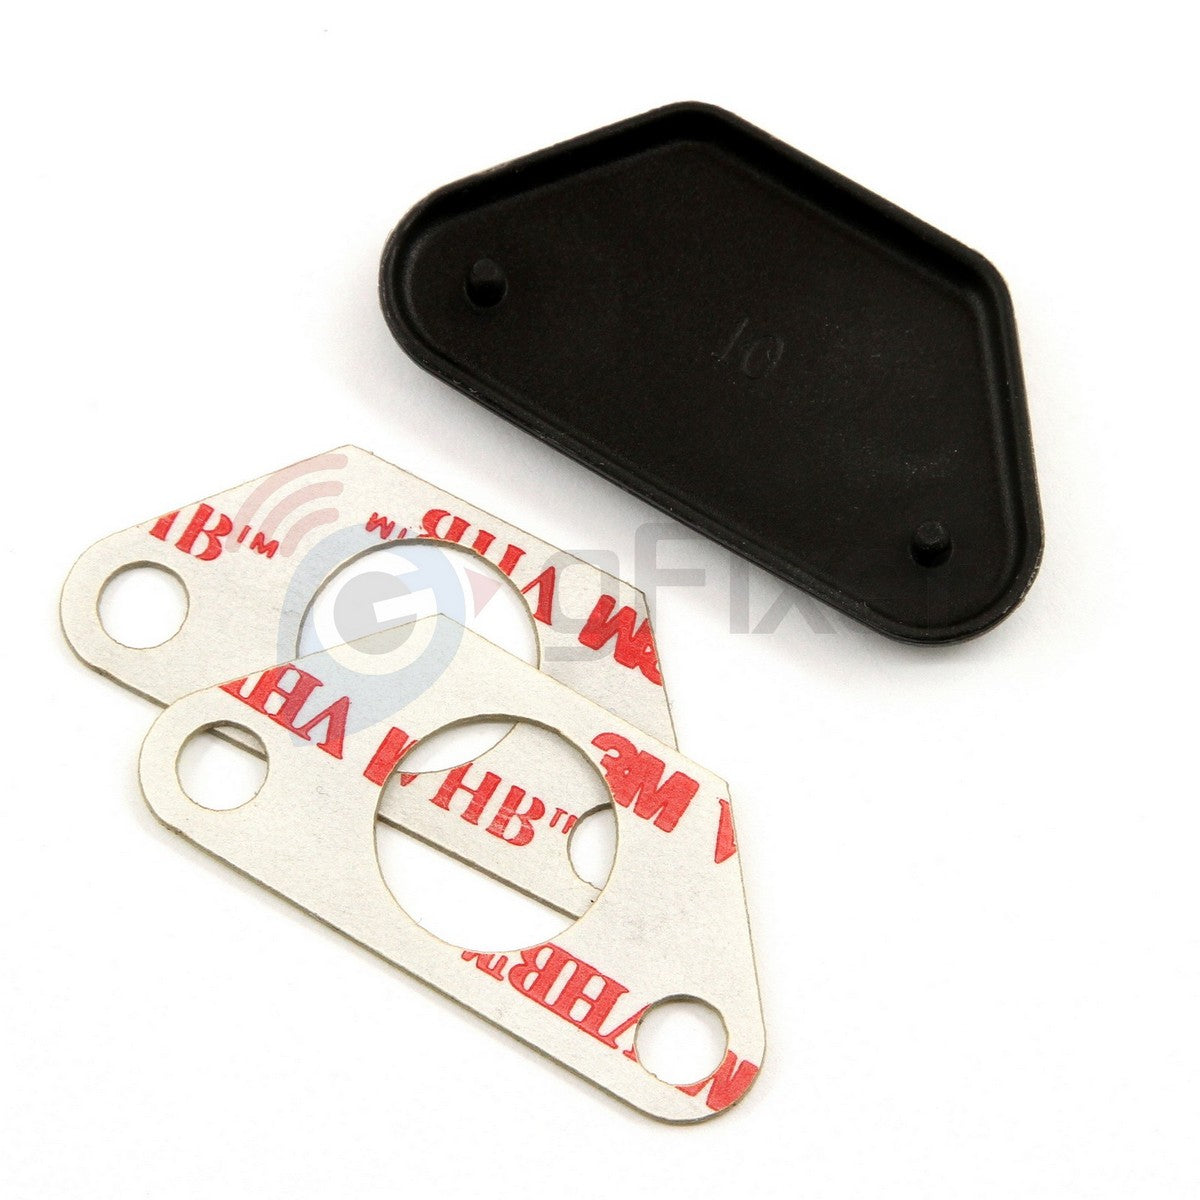 Rubber cover for contacts for Garmin TT 15 (black) New